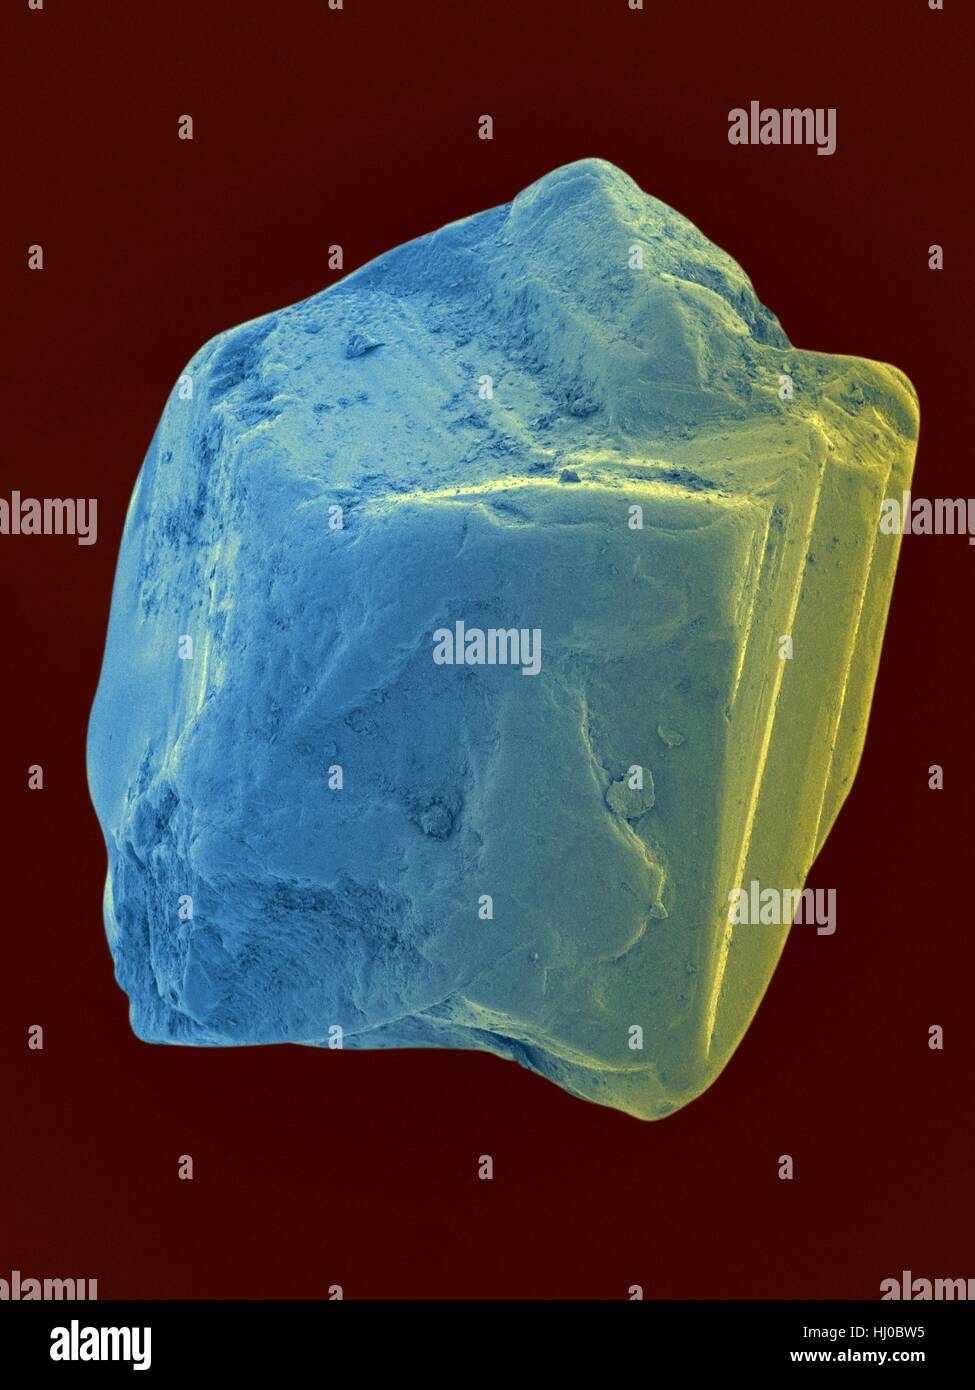 Coloured scanning electron micrograph (SEM) of an uncut sapphire. Sapphire is a typically blue gemstone variety of the mineral corundum (aluminium oxide). Sapphire is very dense and very hard. Non-gem quality sapphire is often used as an industrial abrasive, or as scratch-resistant glass. Magnification: x150 when shortest axis printed at 25 millimetres. Stock Photo